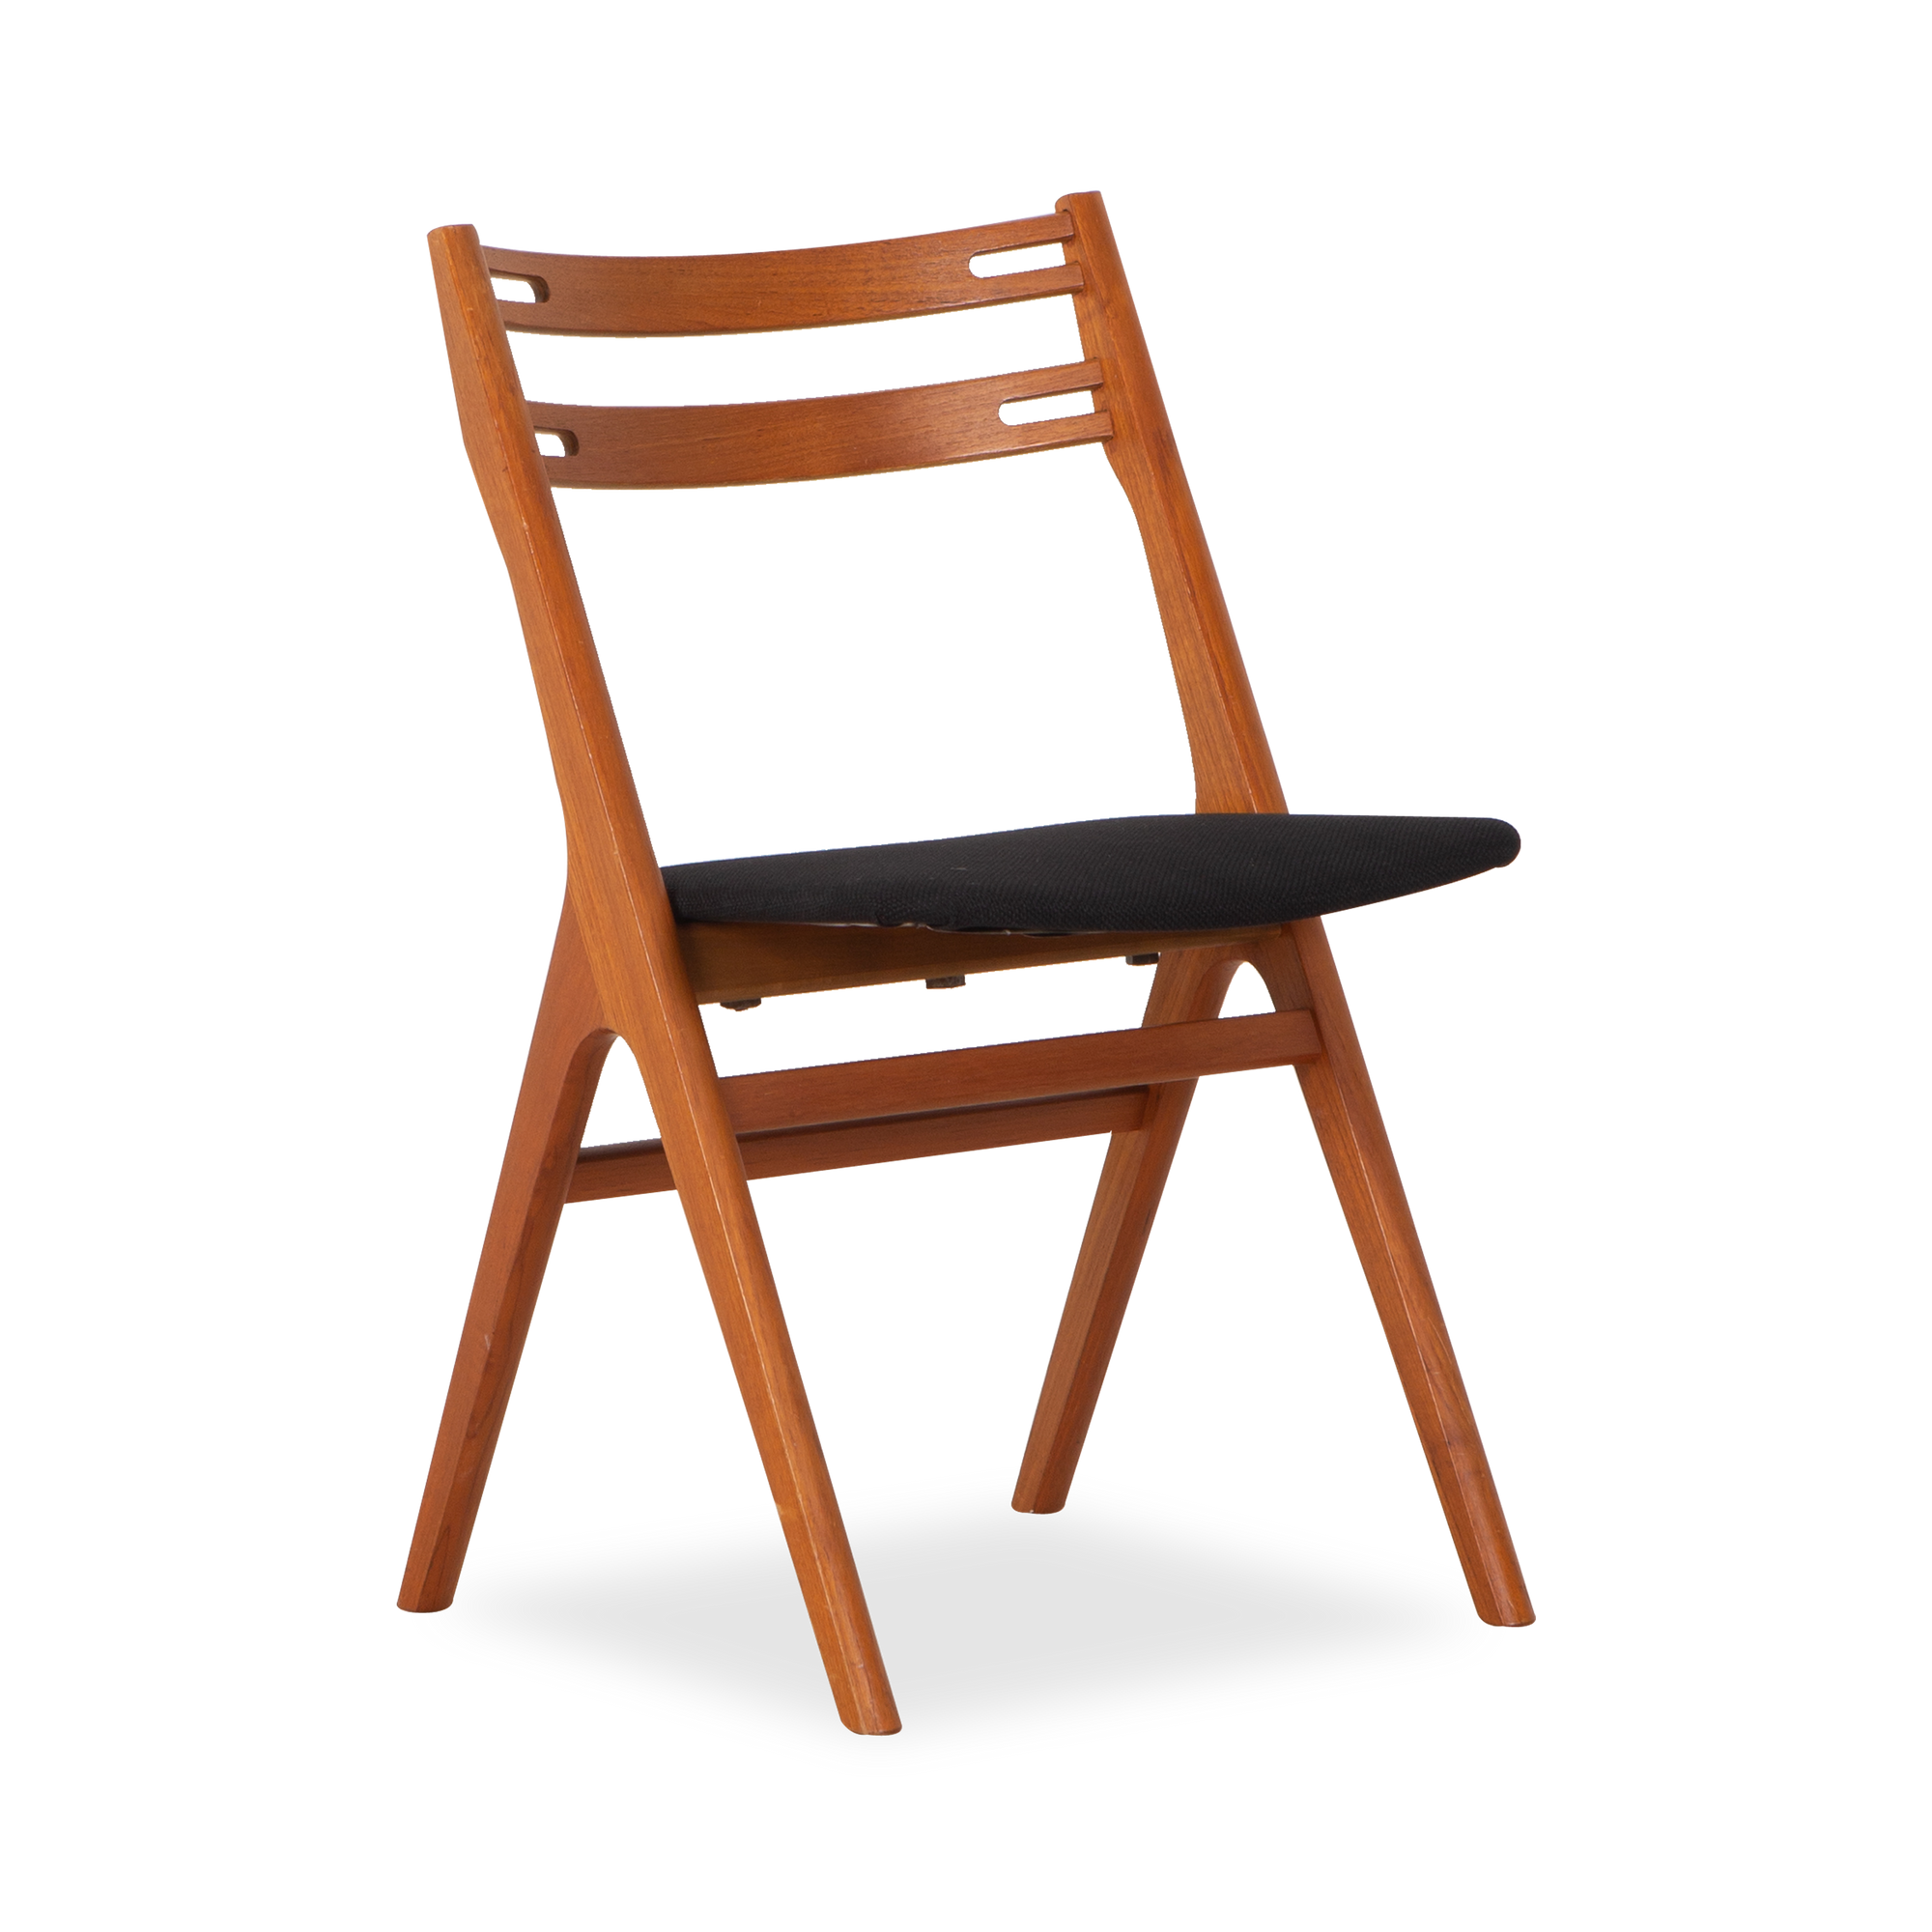 A great example of Scandinavian design and carpentry of the mid-century, this vintage chair was designed by Edmund Jorgensen and manufactured by Jorgensen Mobelfabrik, circa 1960s.